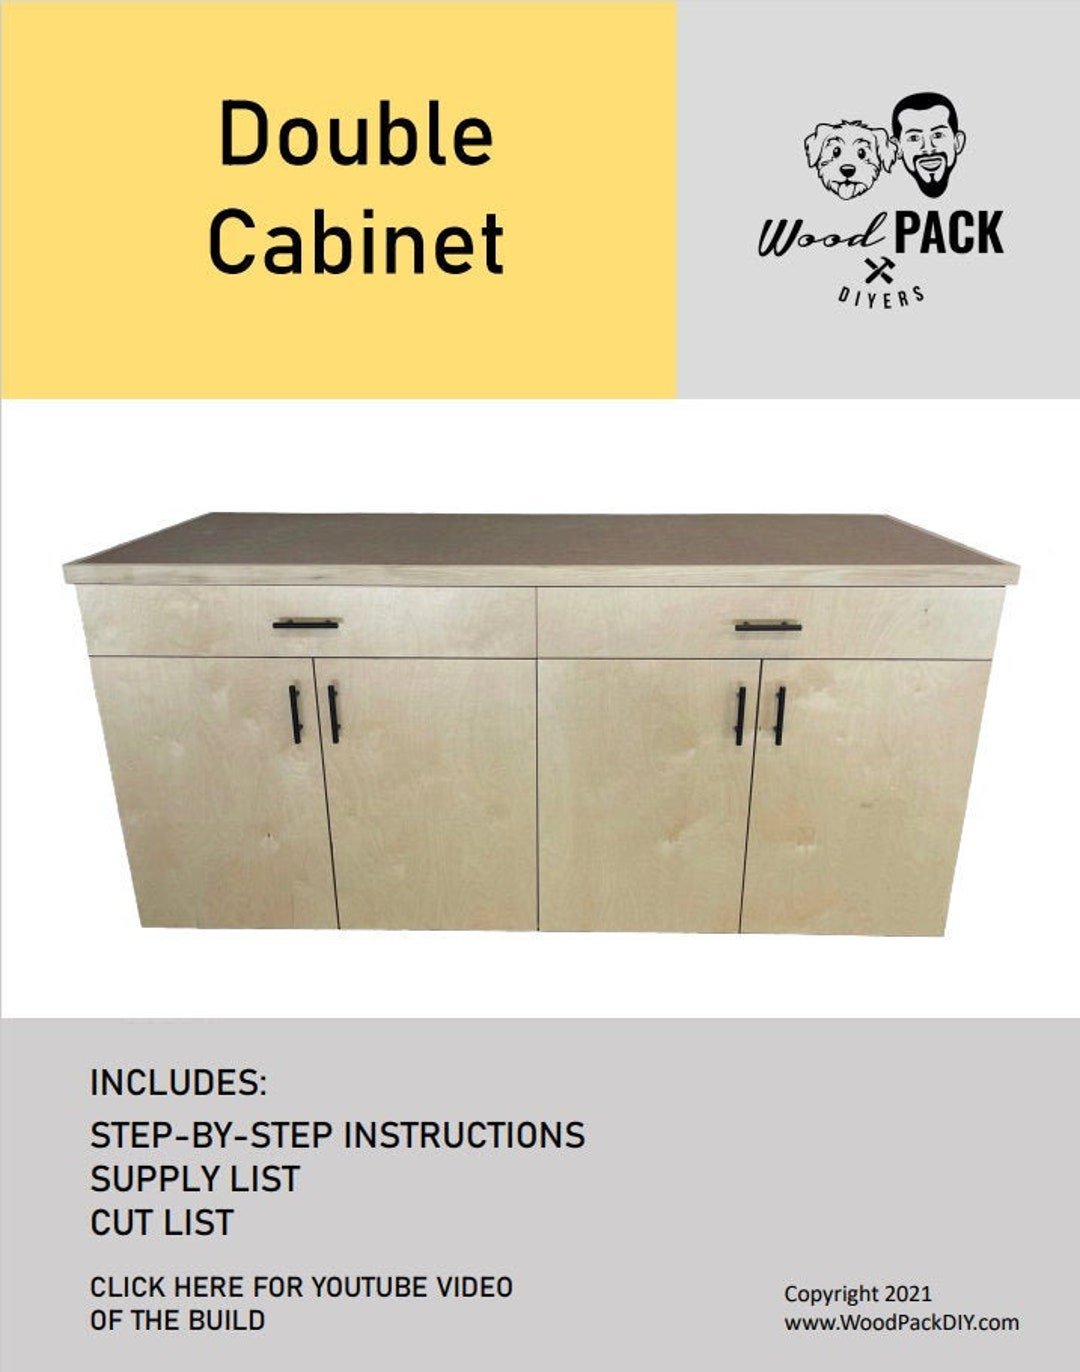 Double Cabinet Workbench Plans - Etsy